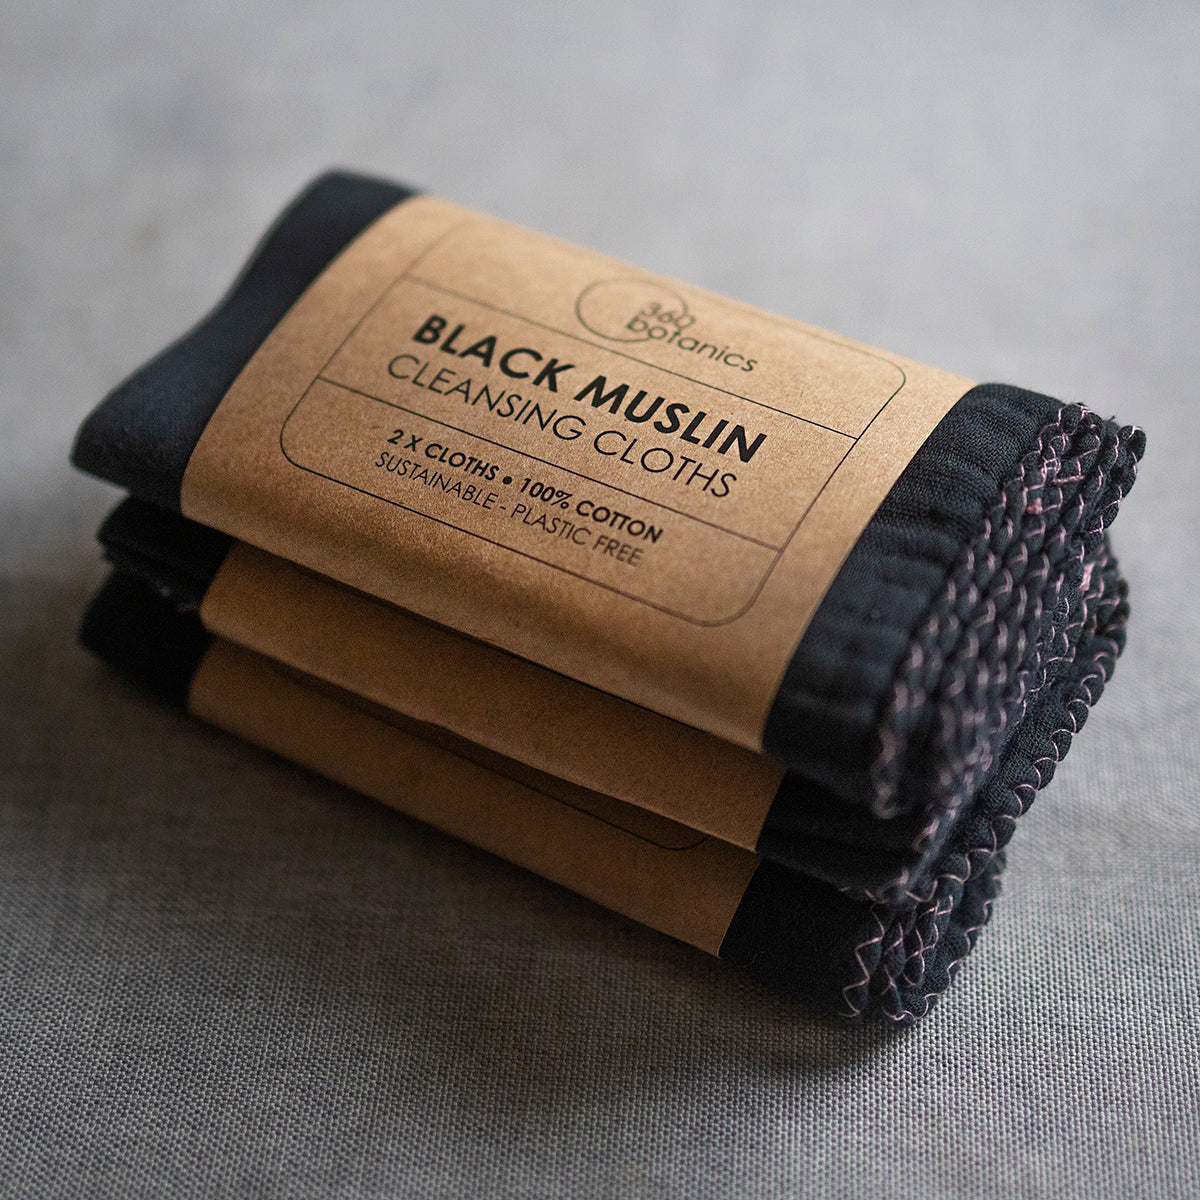  A stack of black muslin cleansing cloths, labeled as "2x Cloths, 100% Cotton, Sustainable, Plastic Free" by 360 Botanics, wrapped in a kraft paper band, set against a gray textured background.